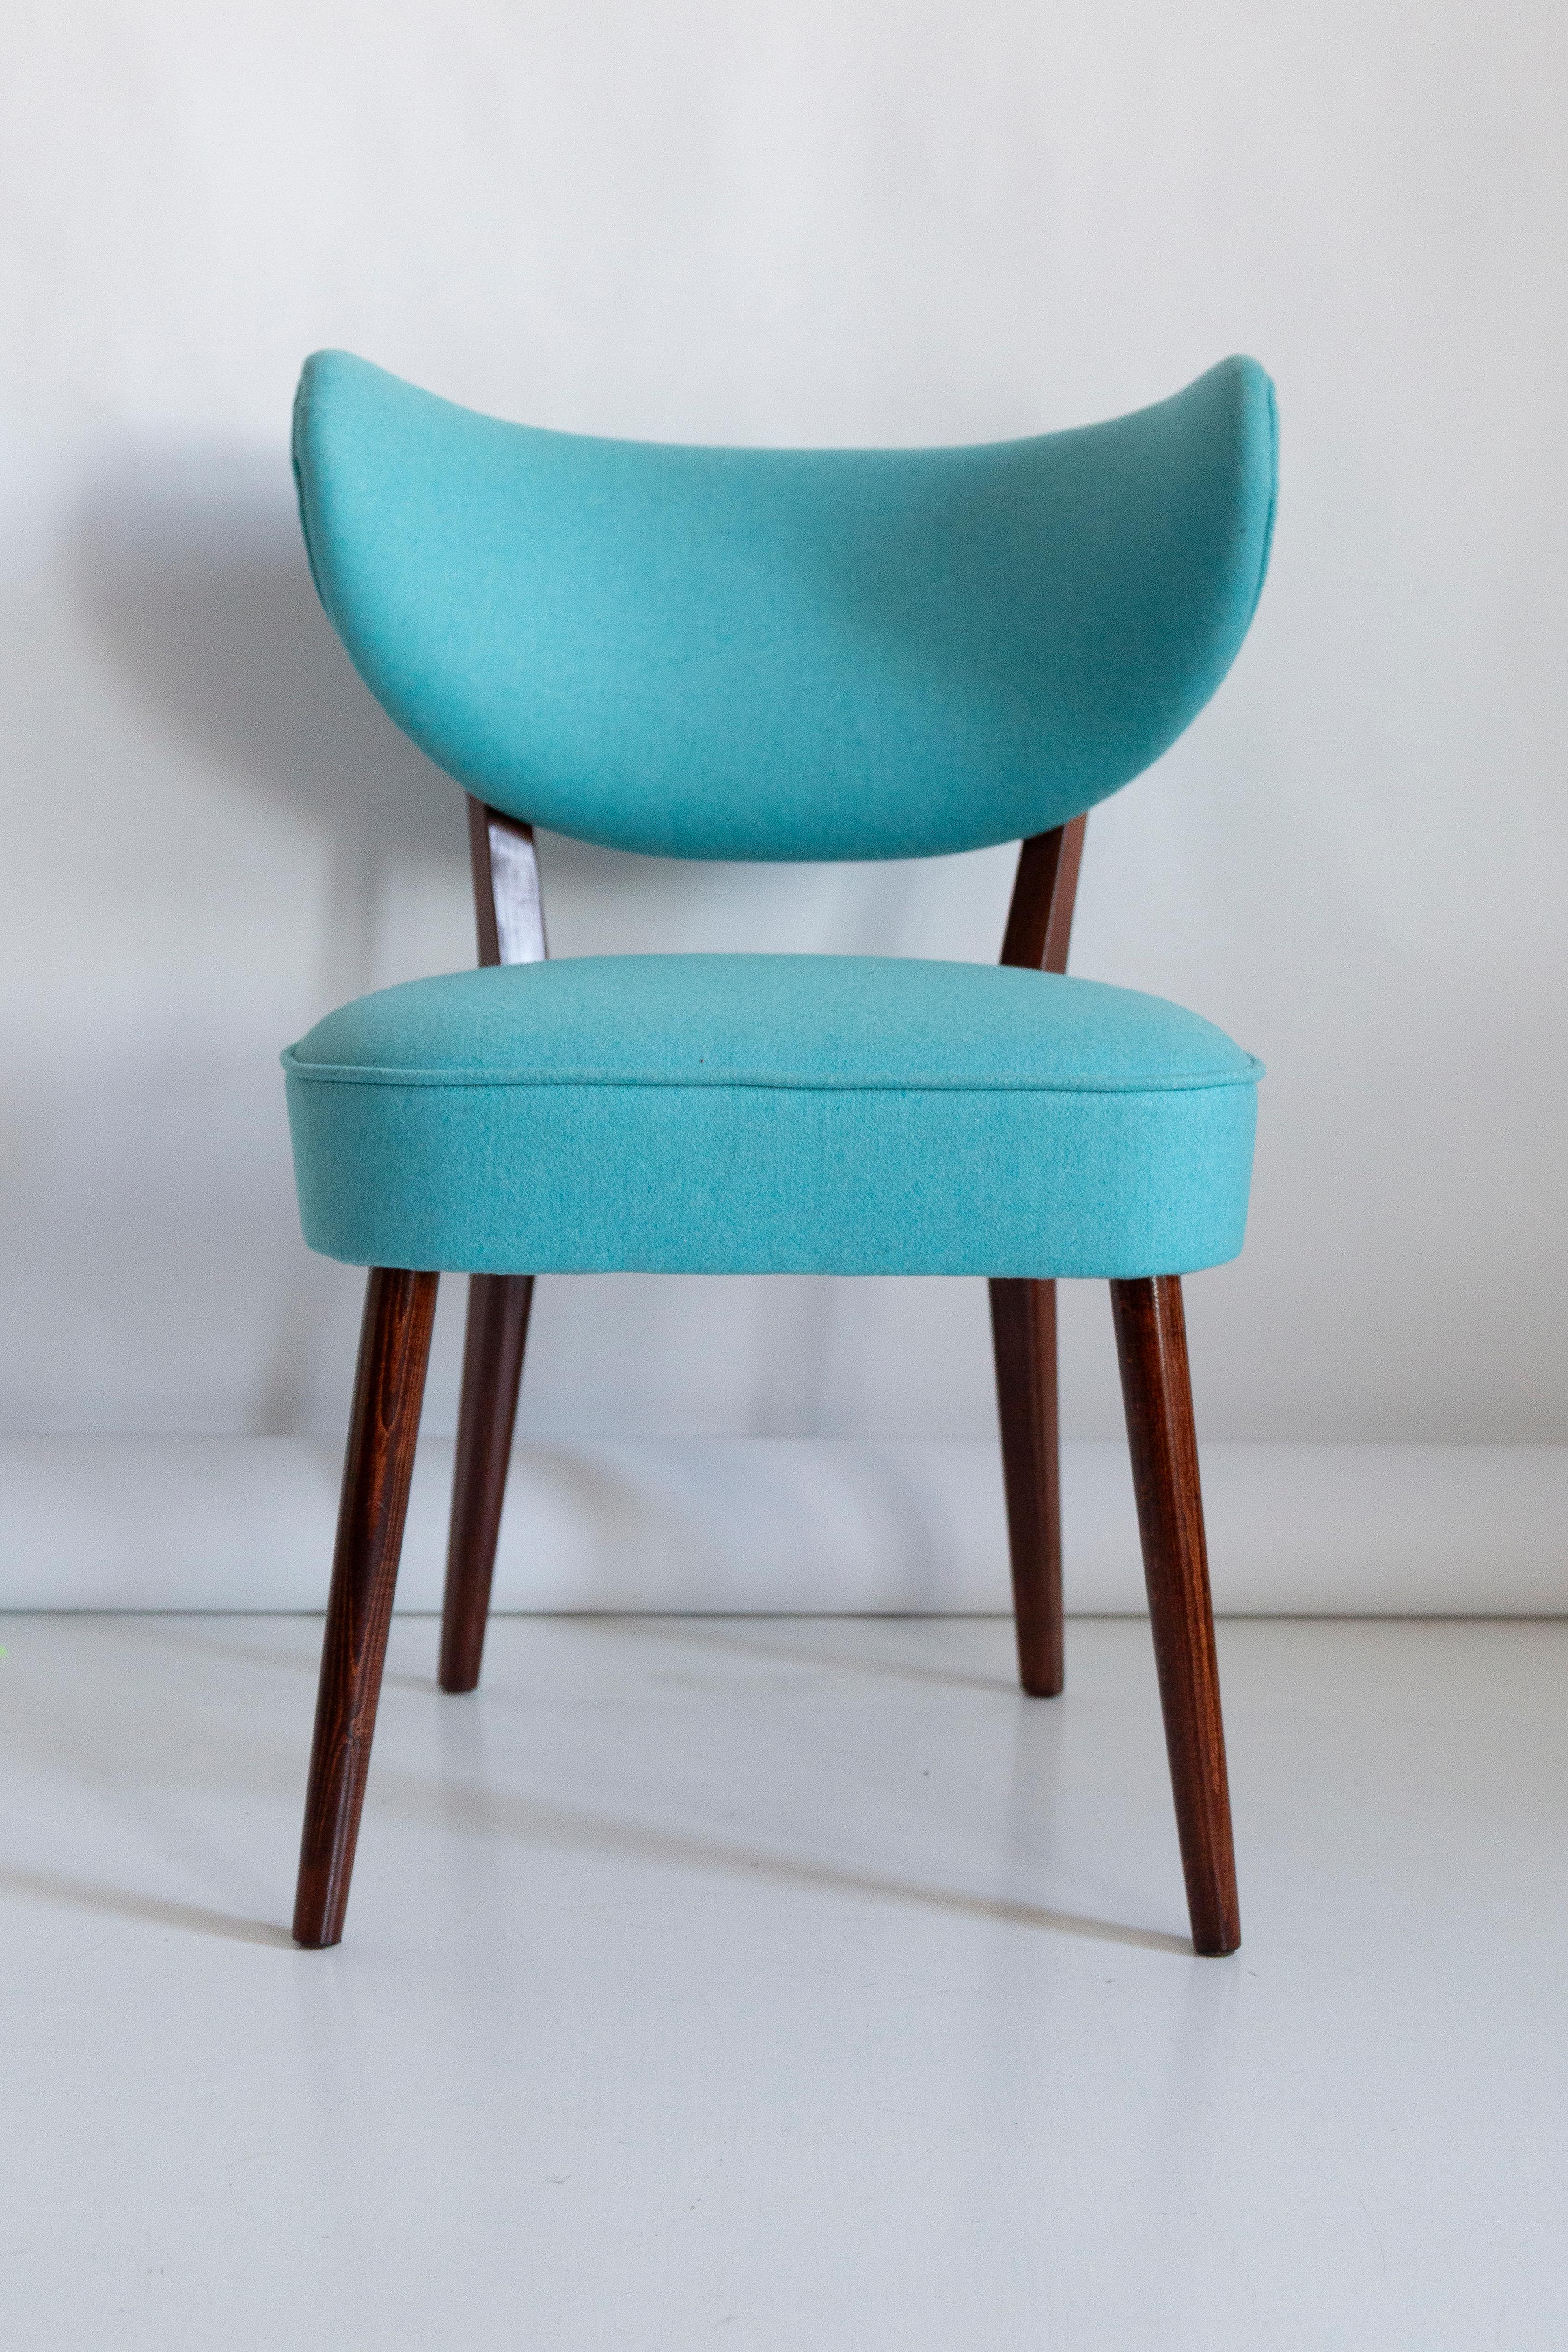 Set of Ten Shell Dining Chairs, Turquoise Wool, by Vintola Studio, Europe. For Sale 1